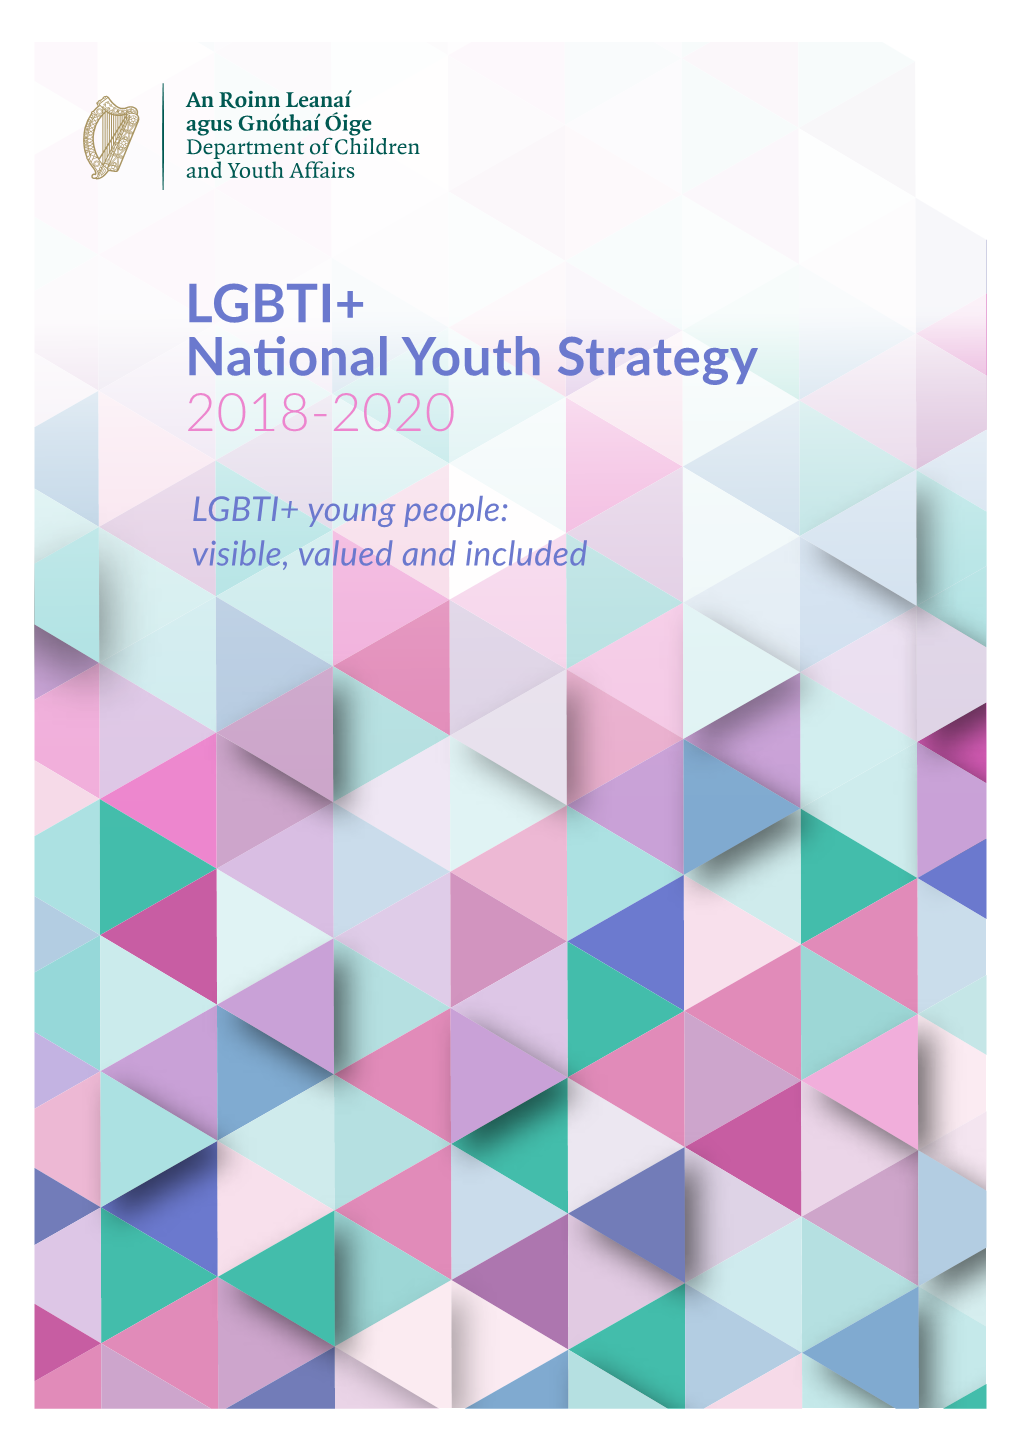 LGBTI+ National Youth Strategy 2018-2020